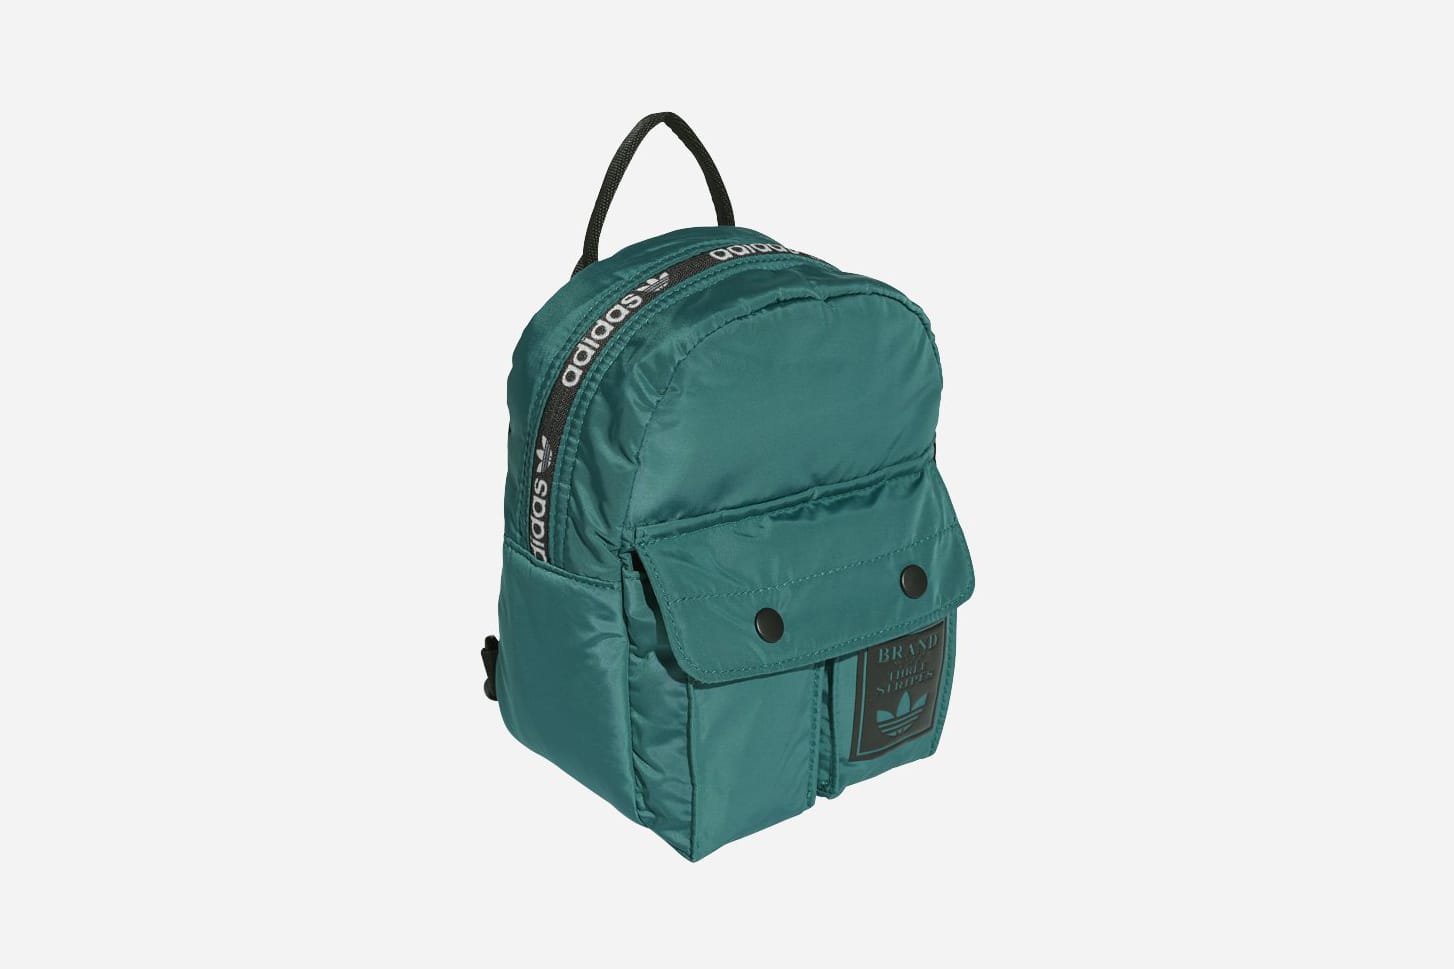 adidas black and green backpack